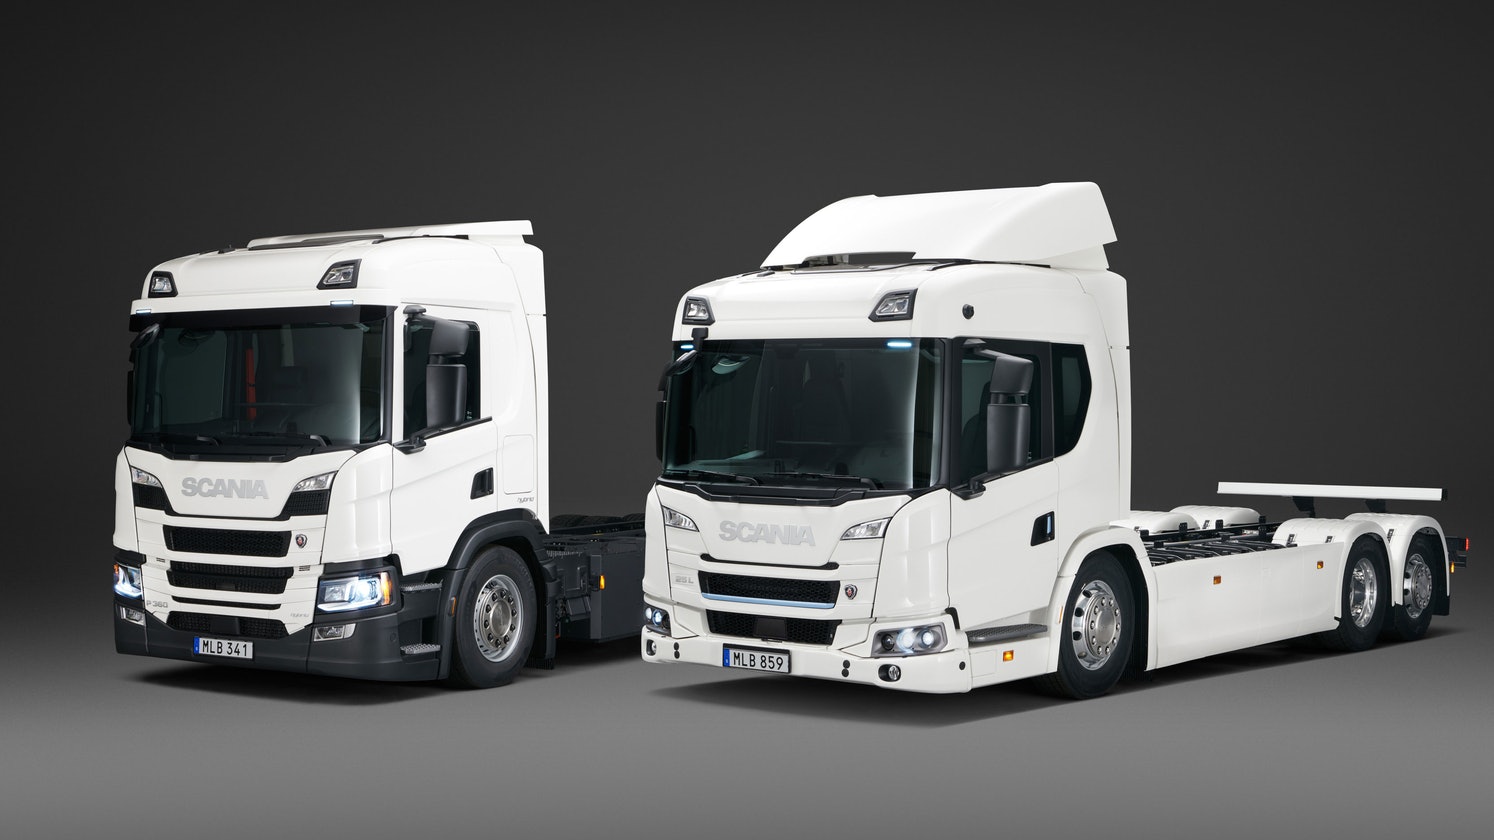 Scania updates driver assistance and truck technology for new models